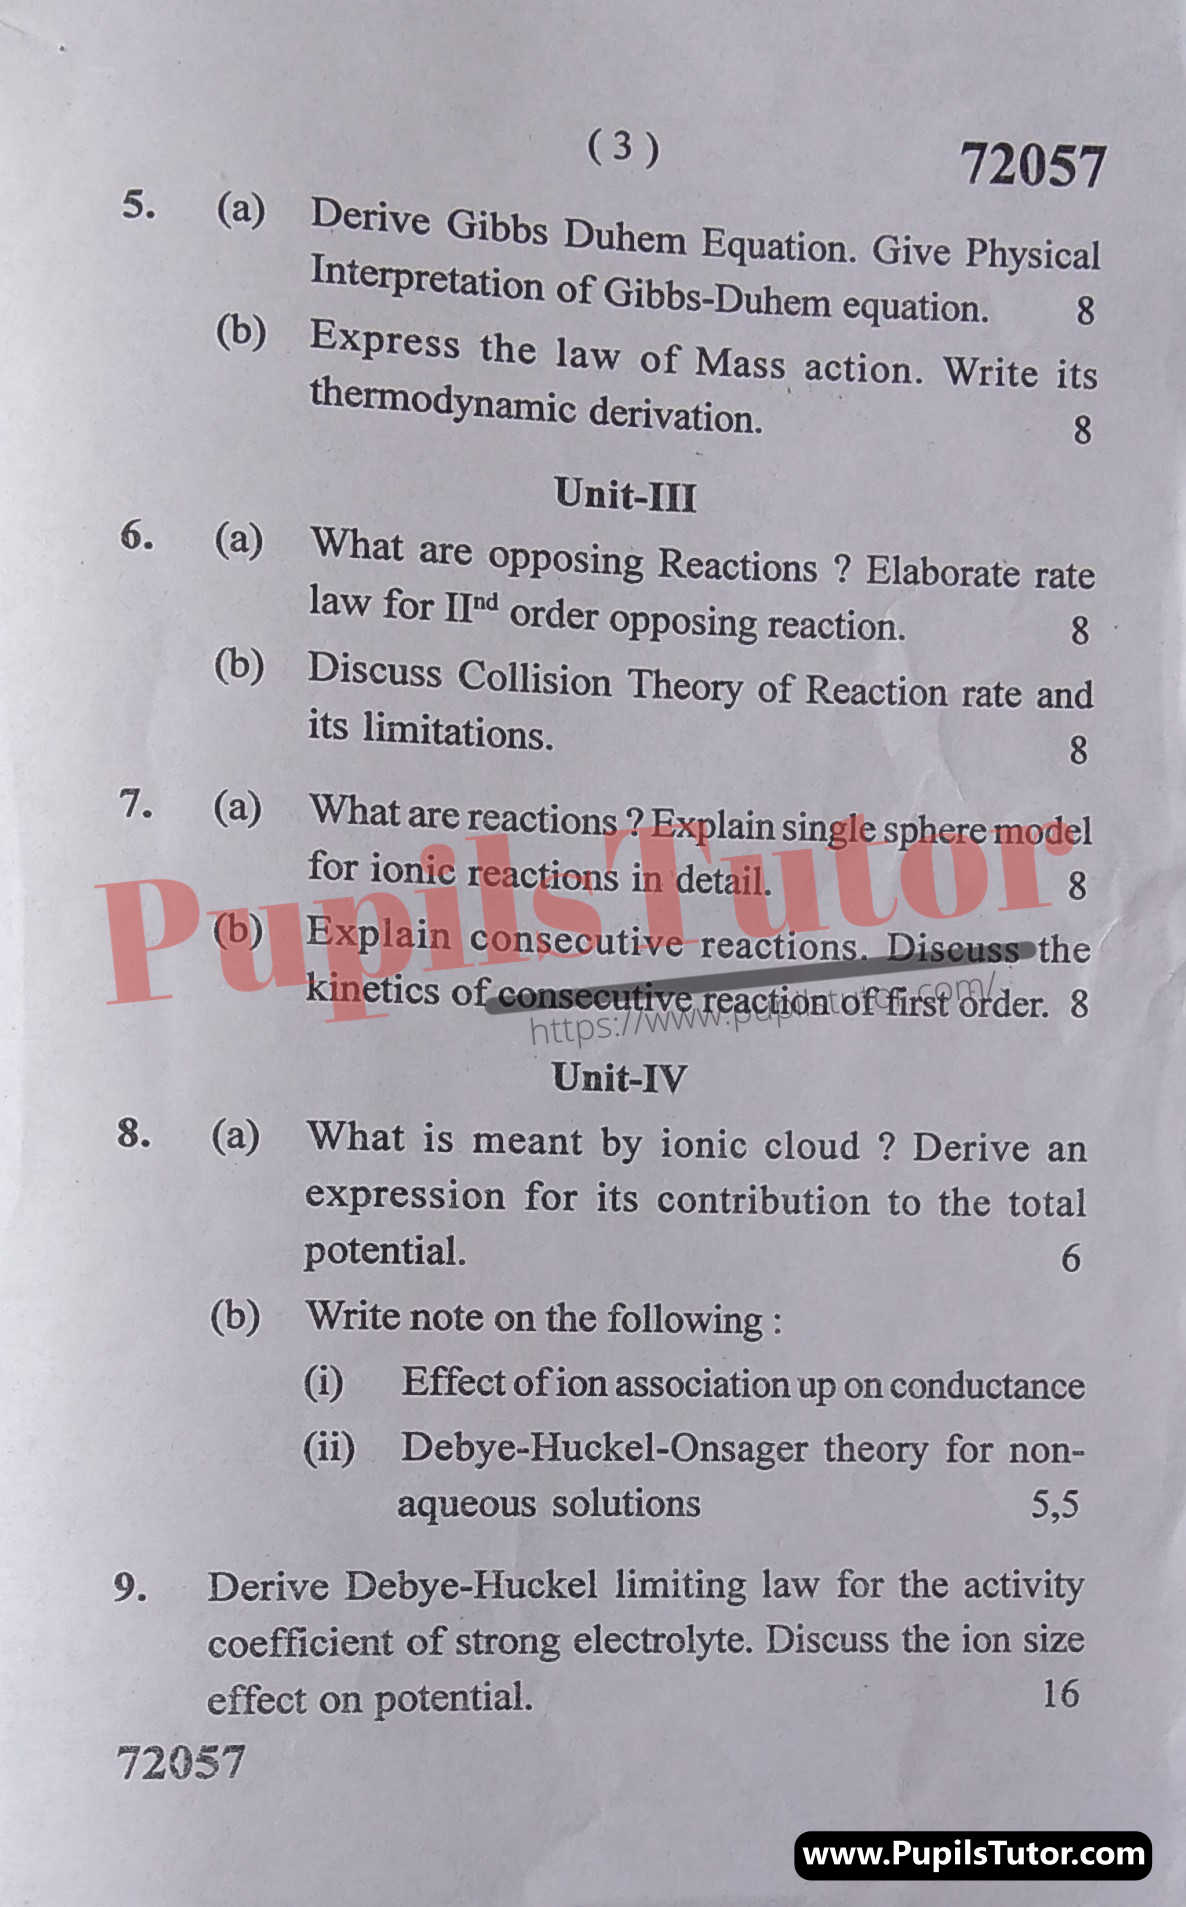 Free Download PDF Of M.D. University M.Sc. [Chemistry] First Semester Latest Question Paper For Physical Chemistry Subject (Page 3) - https://www.pupilstutor.com